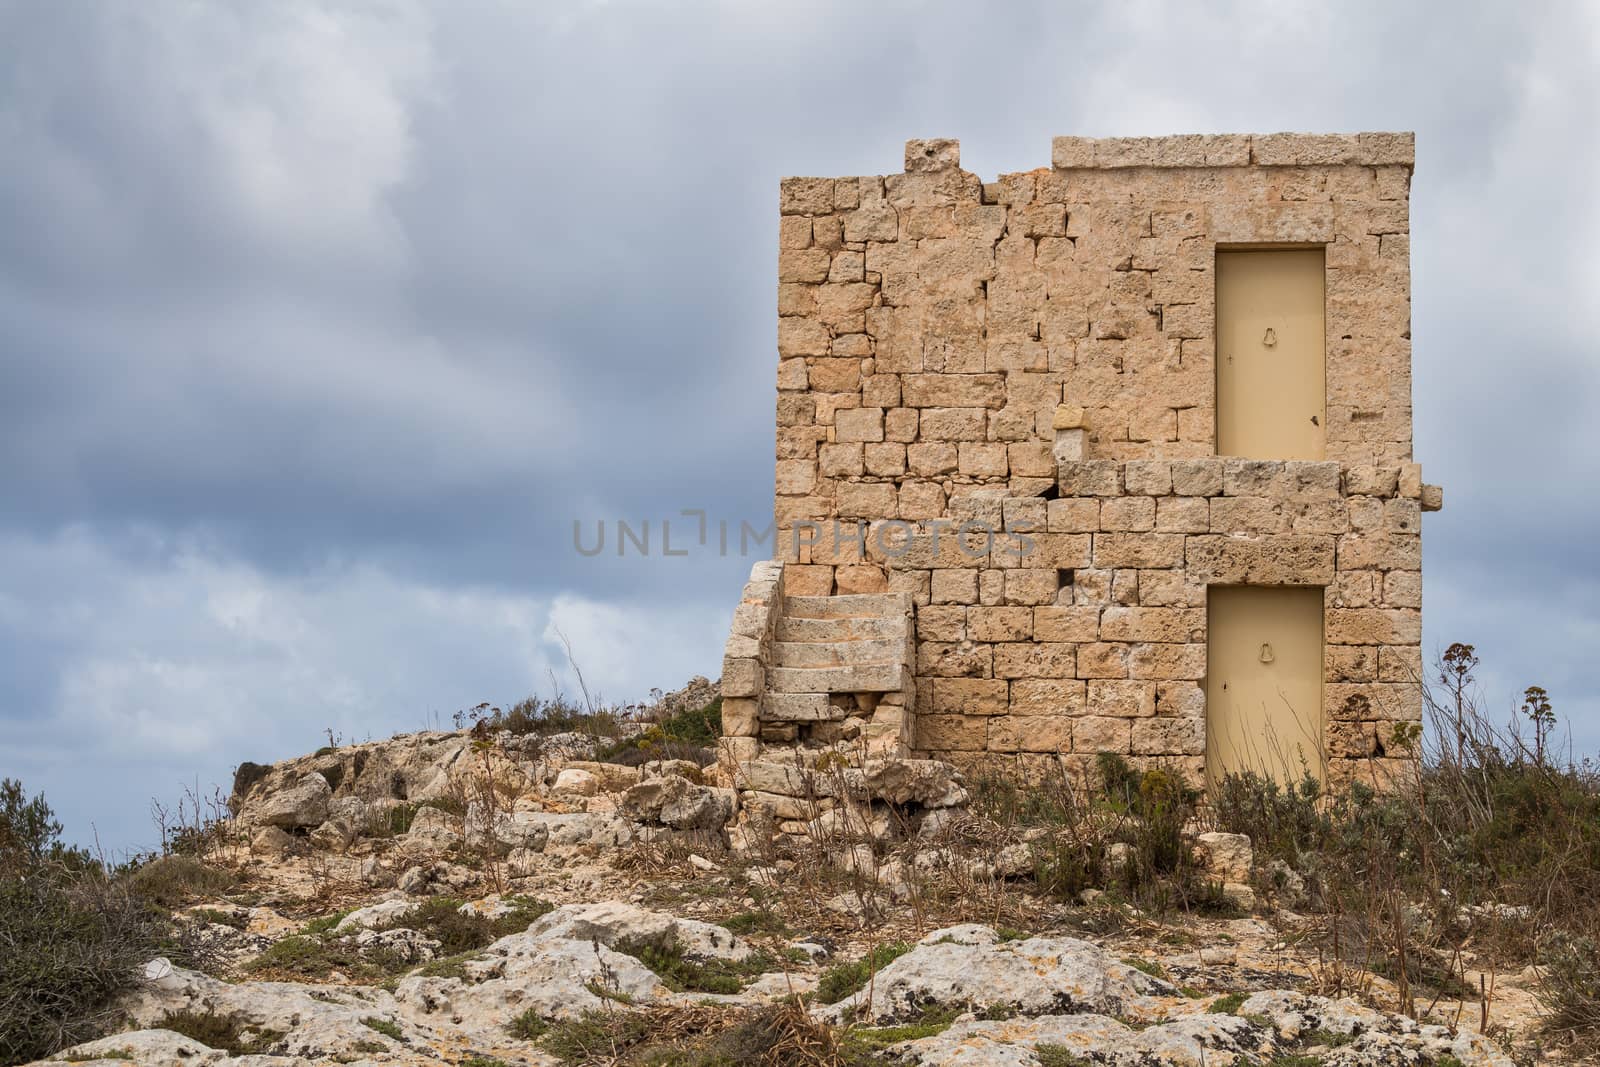 On the top of the hill at Dingli Cliffs, island Malta, an old house made of stones. Cloudy sky in the background.